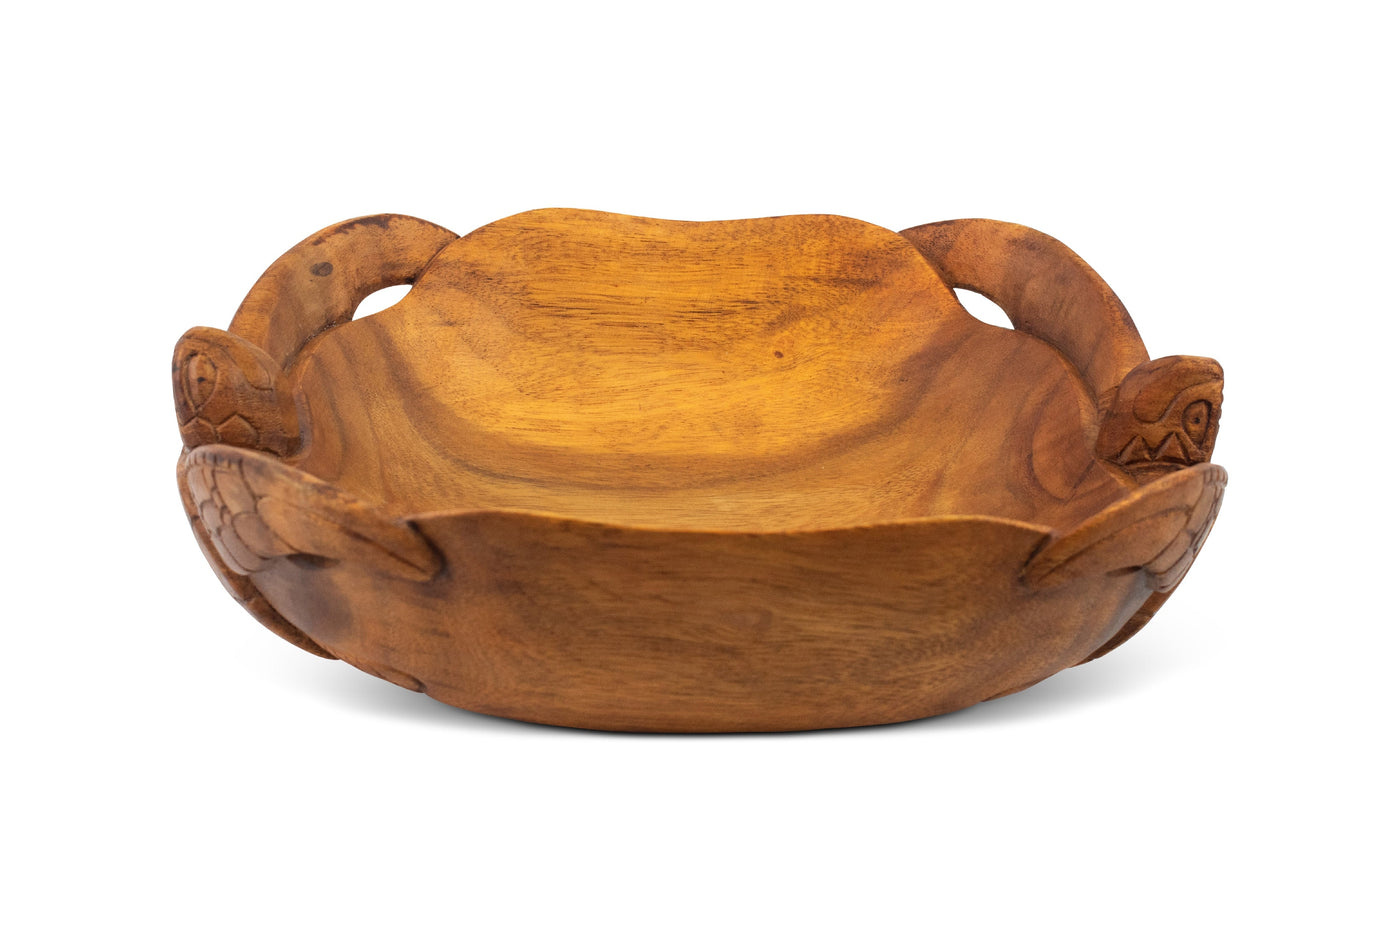 Wooden Handmade Two Turtles Fruit Decorative Bowl Serving Centerpiece Hand Carved Art Home Decor Decoration Handcrafted Gift Storage Accent Wood